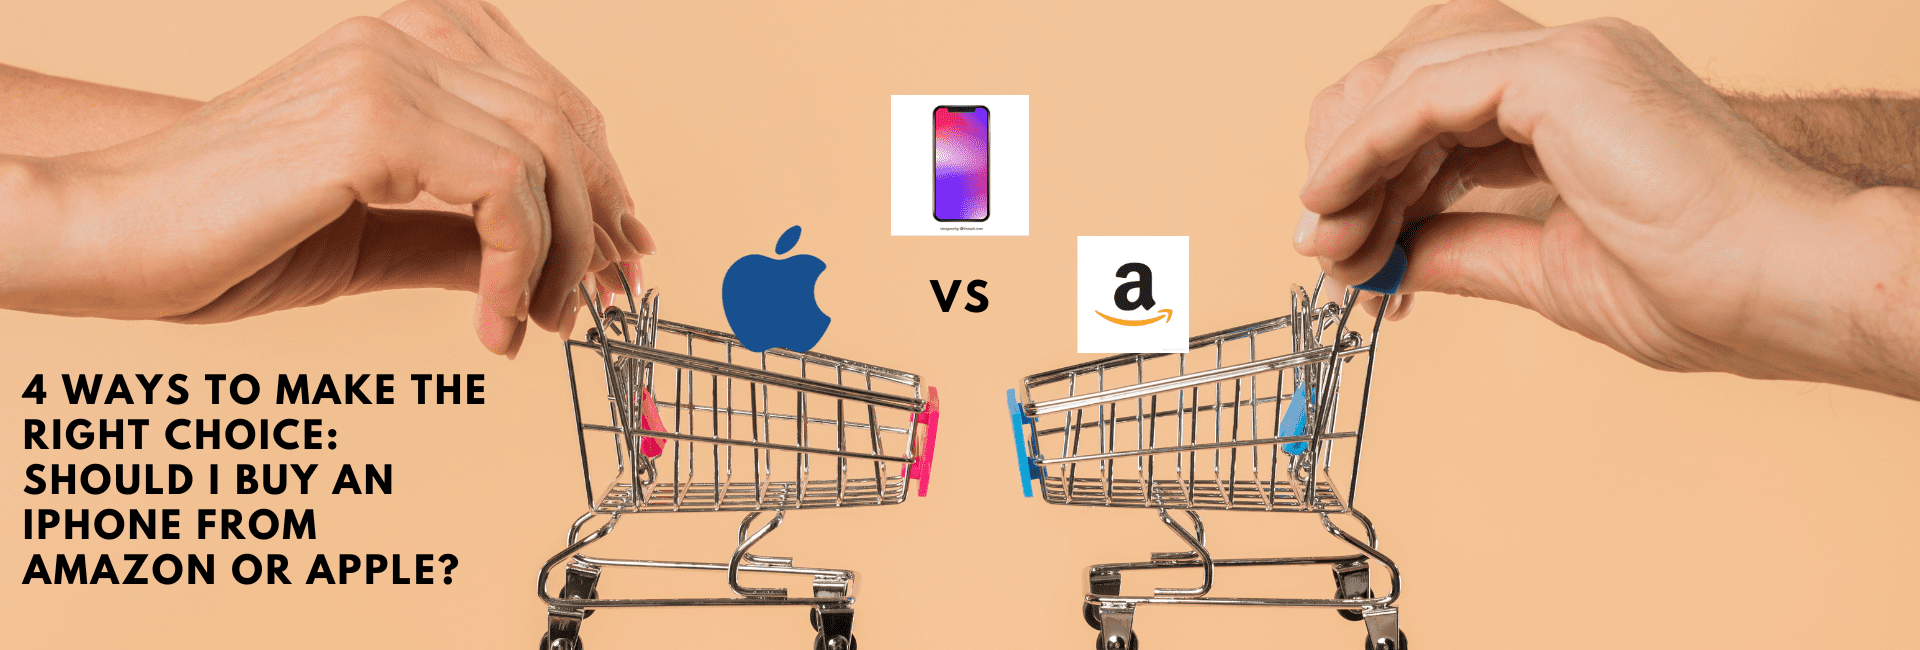 4 Ways to Make the Right Choice: Should I buy an iPhone from Amazon or Apple?